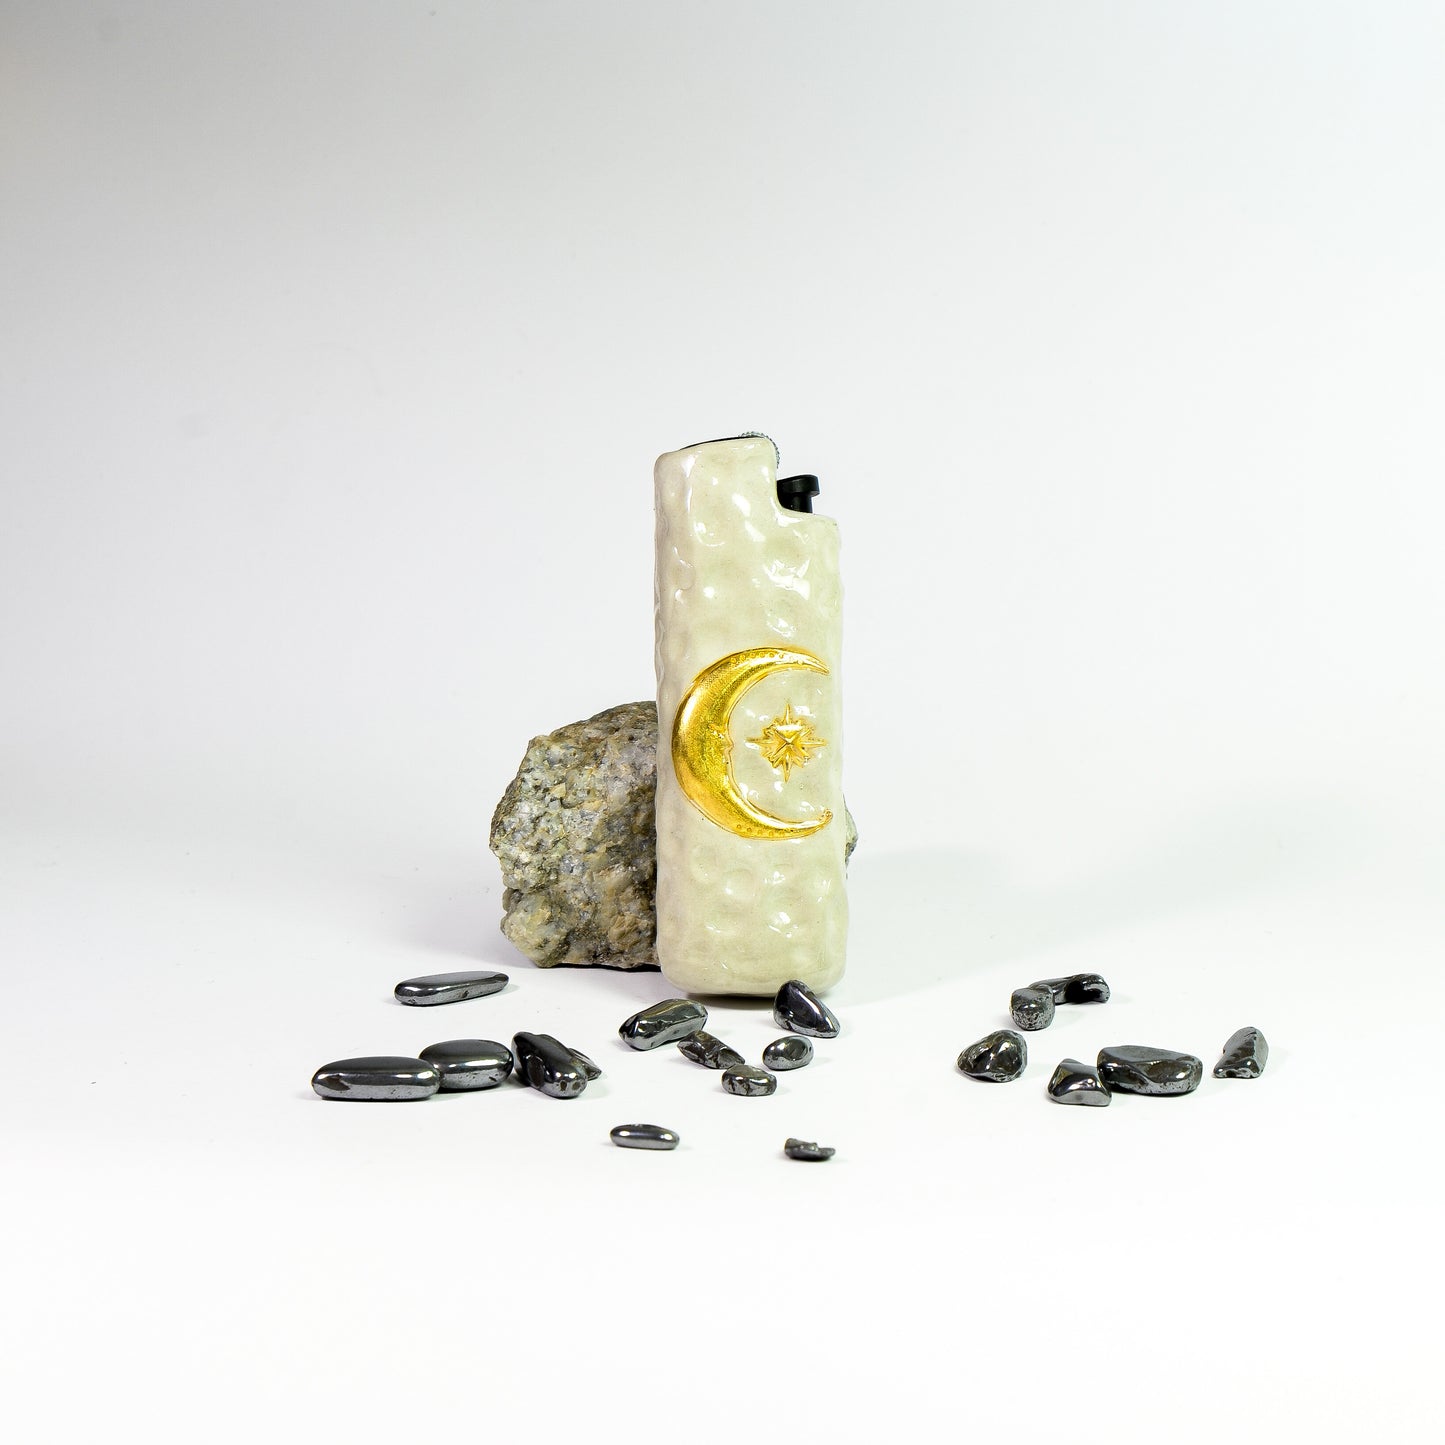 Bic J3 / Cricket lighter case  handmade  the moon and the stars